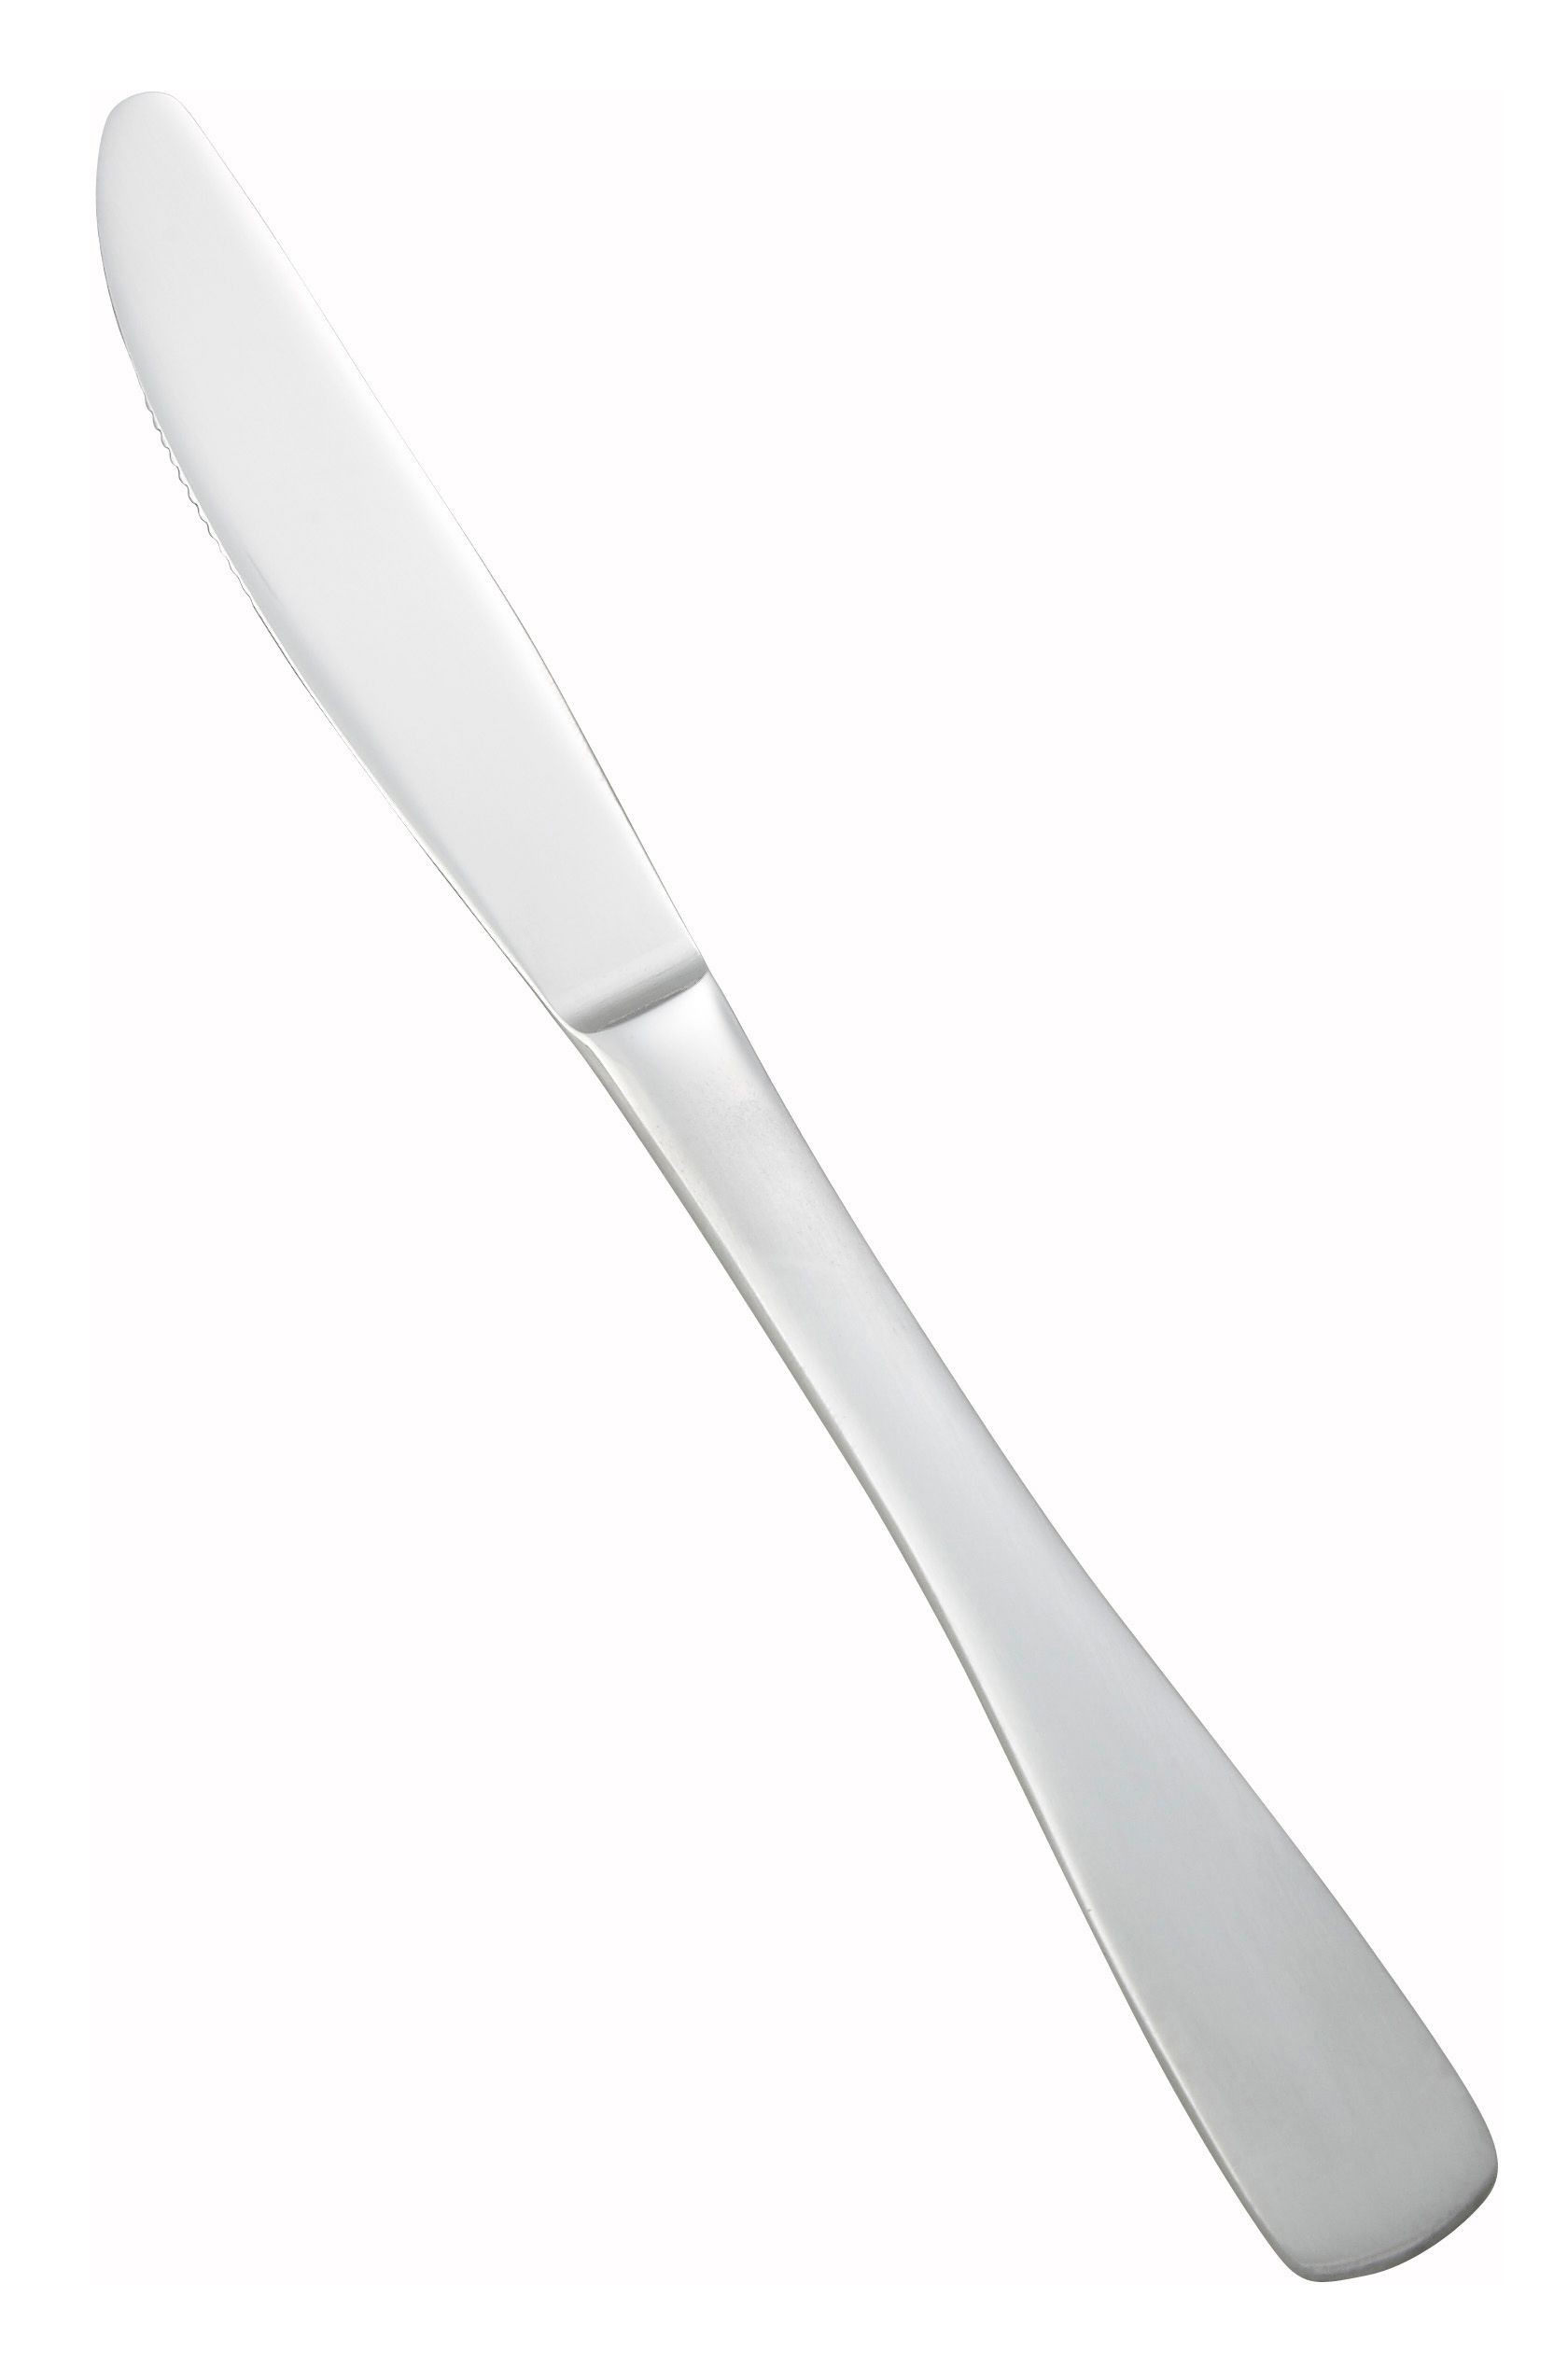 Winco 0016-08 Winston Heavy Weight Satin Finish Stainless Steel Dinner Knife (12/Pack)